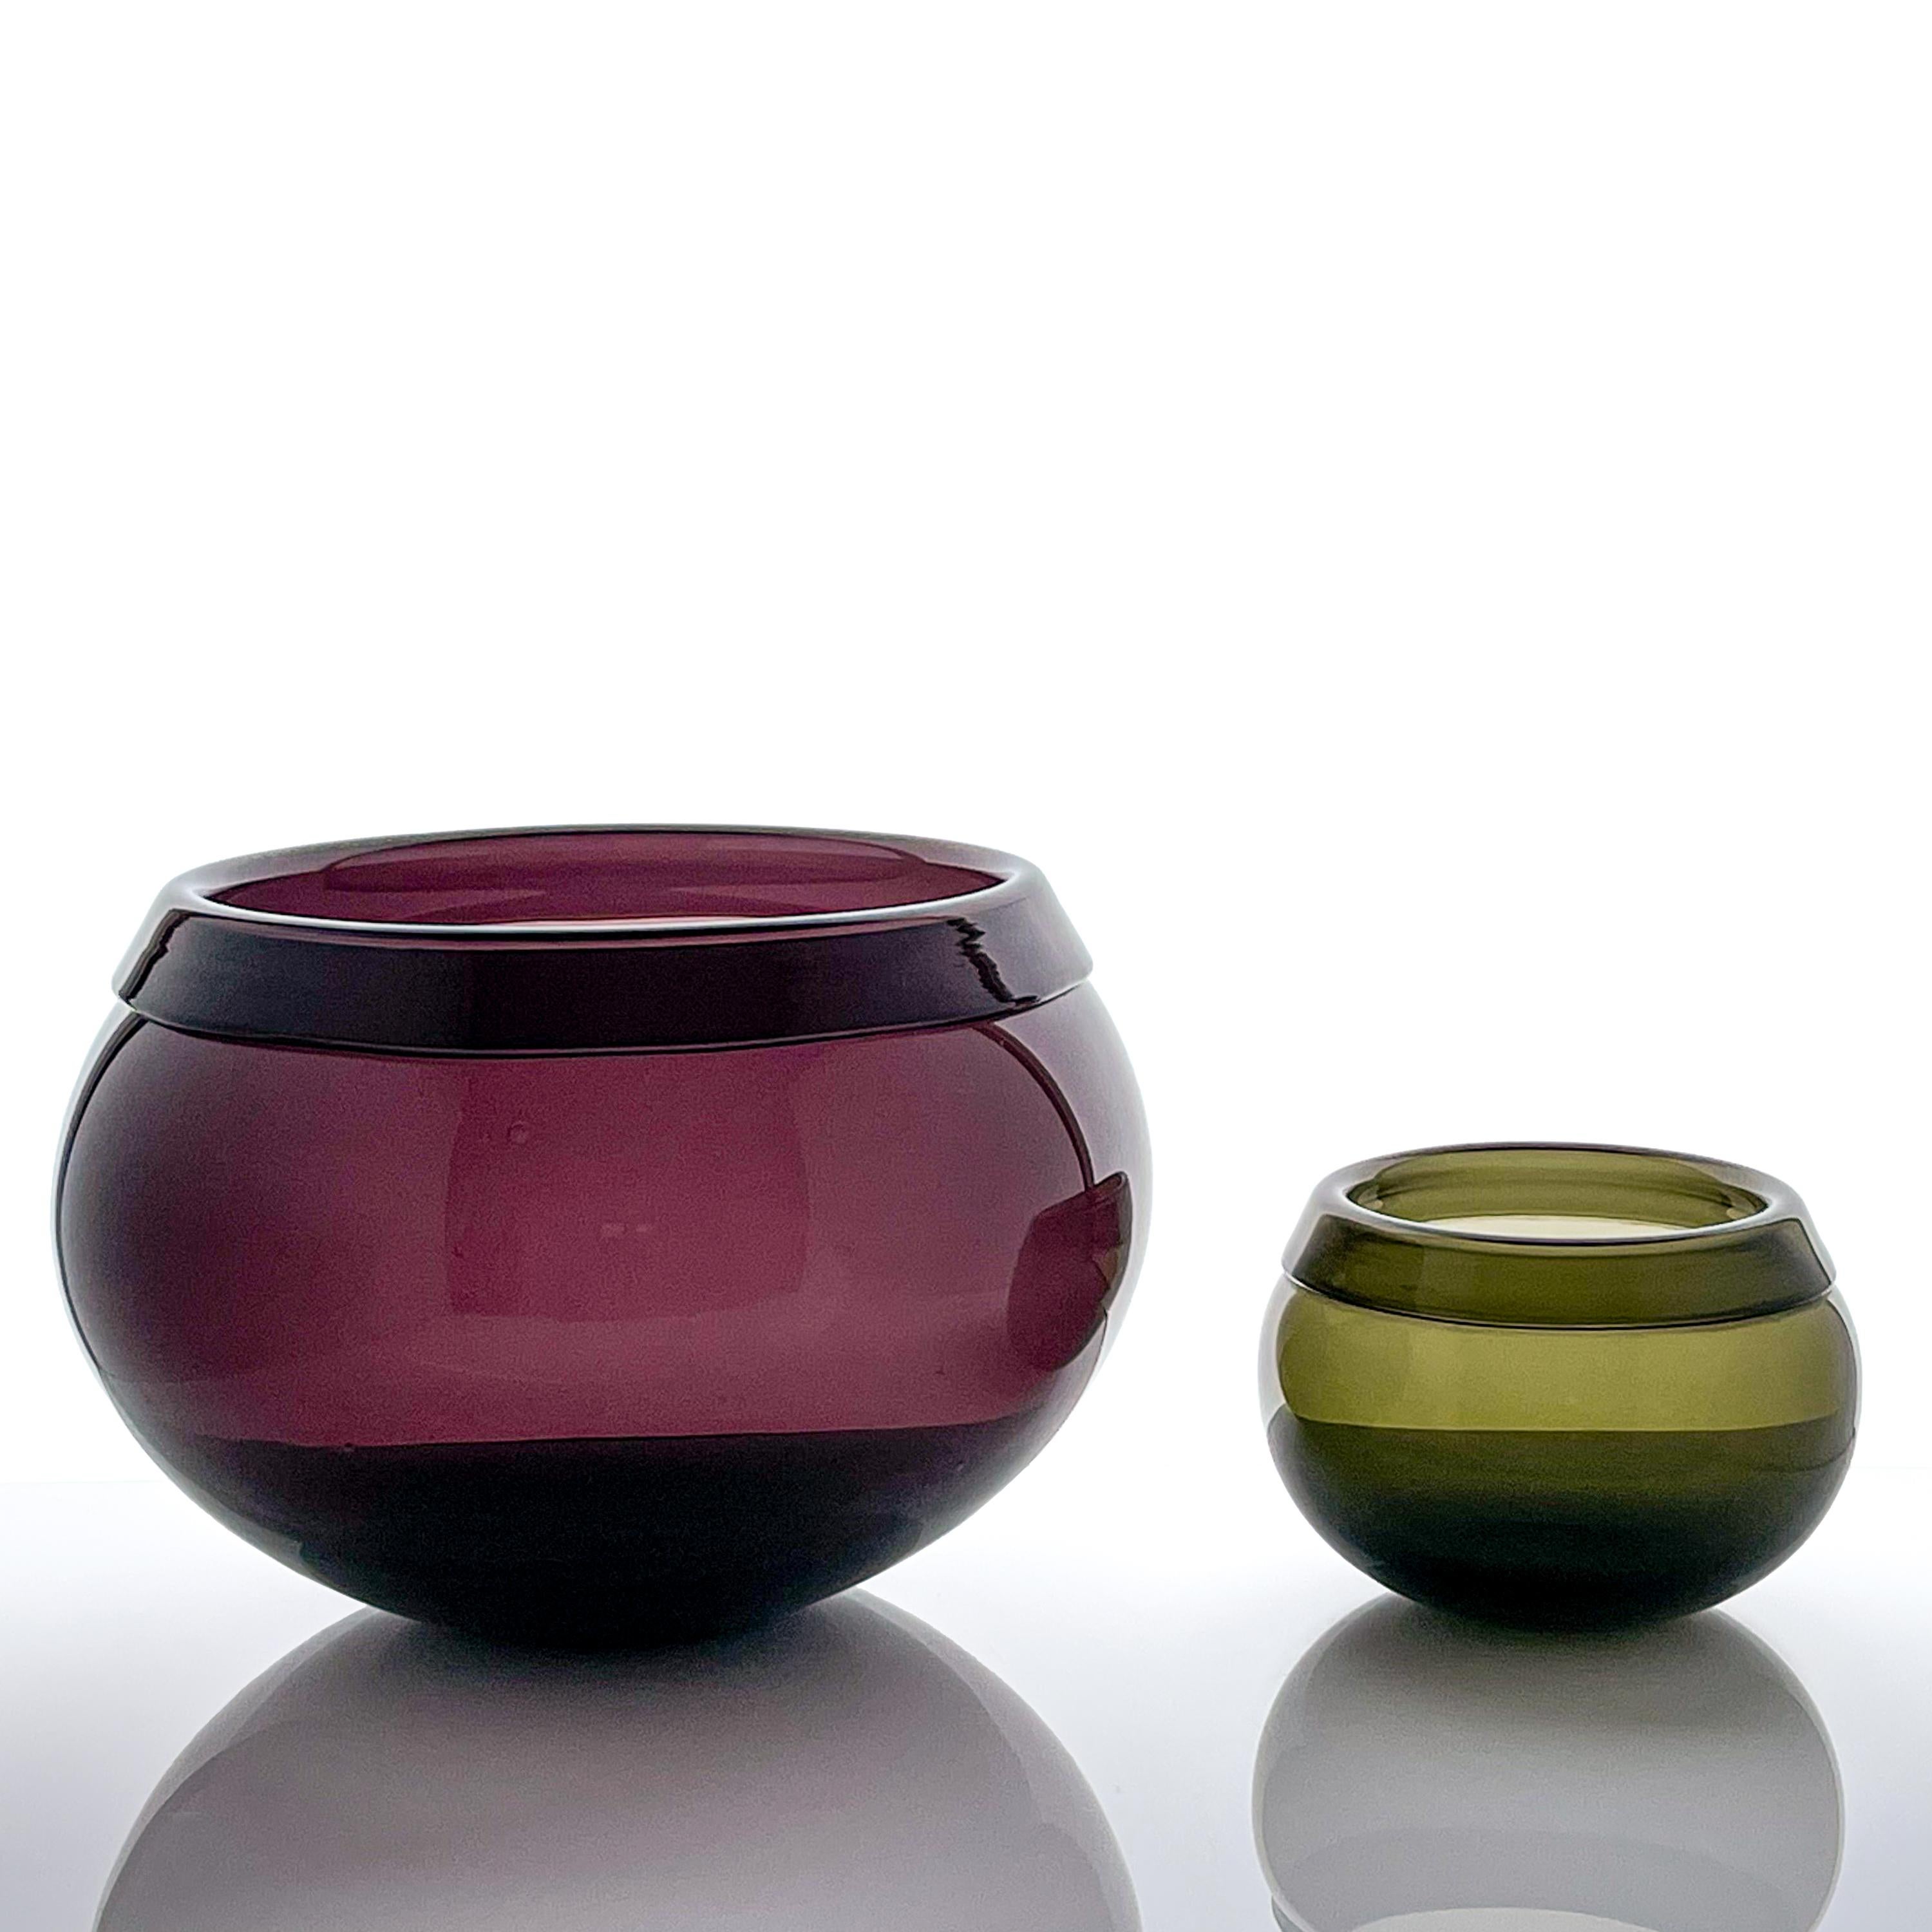 Scandinavian Modern Timo Sarpaneva Glass Bowls Pantareuna Green Purple 1950s

Two turned-mould blown, flared and rim folded colored glass “Pantareuna” bowls, model i-302. Designed by famous Finnish artist Timo Sarpaneva in 1956 and executed by